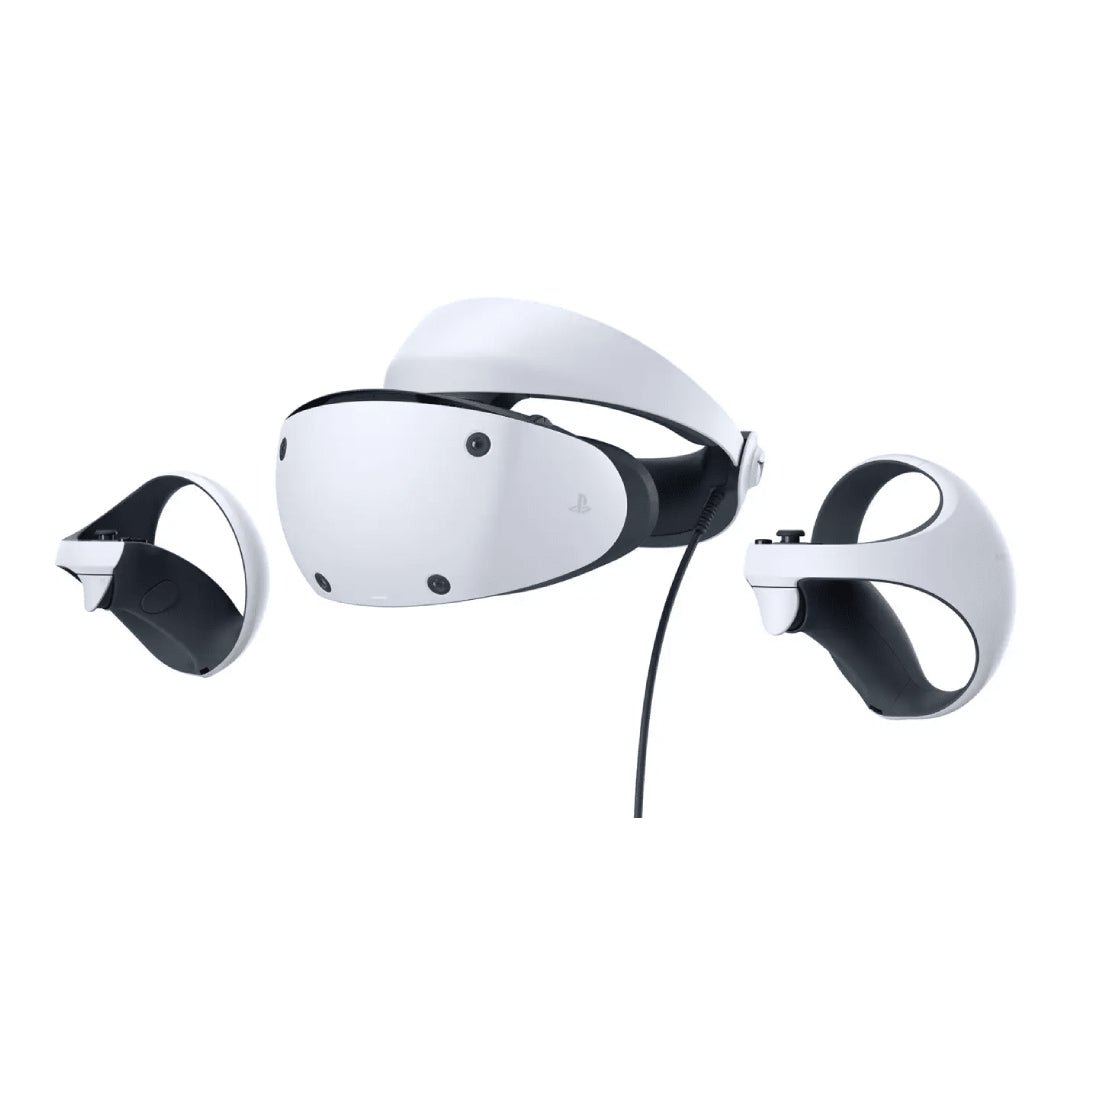 (Pre-Order) Sony PS5 PlayStation VR 2 Standalone - أكسسوار محاكاة - Store 974 | ستور ٩٧٤